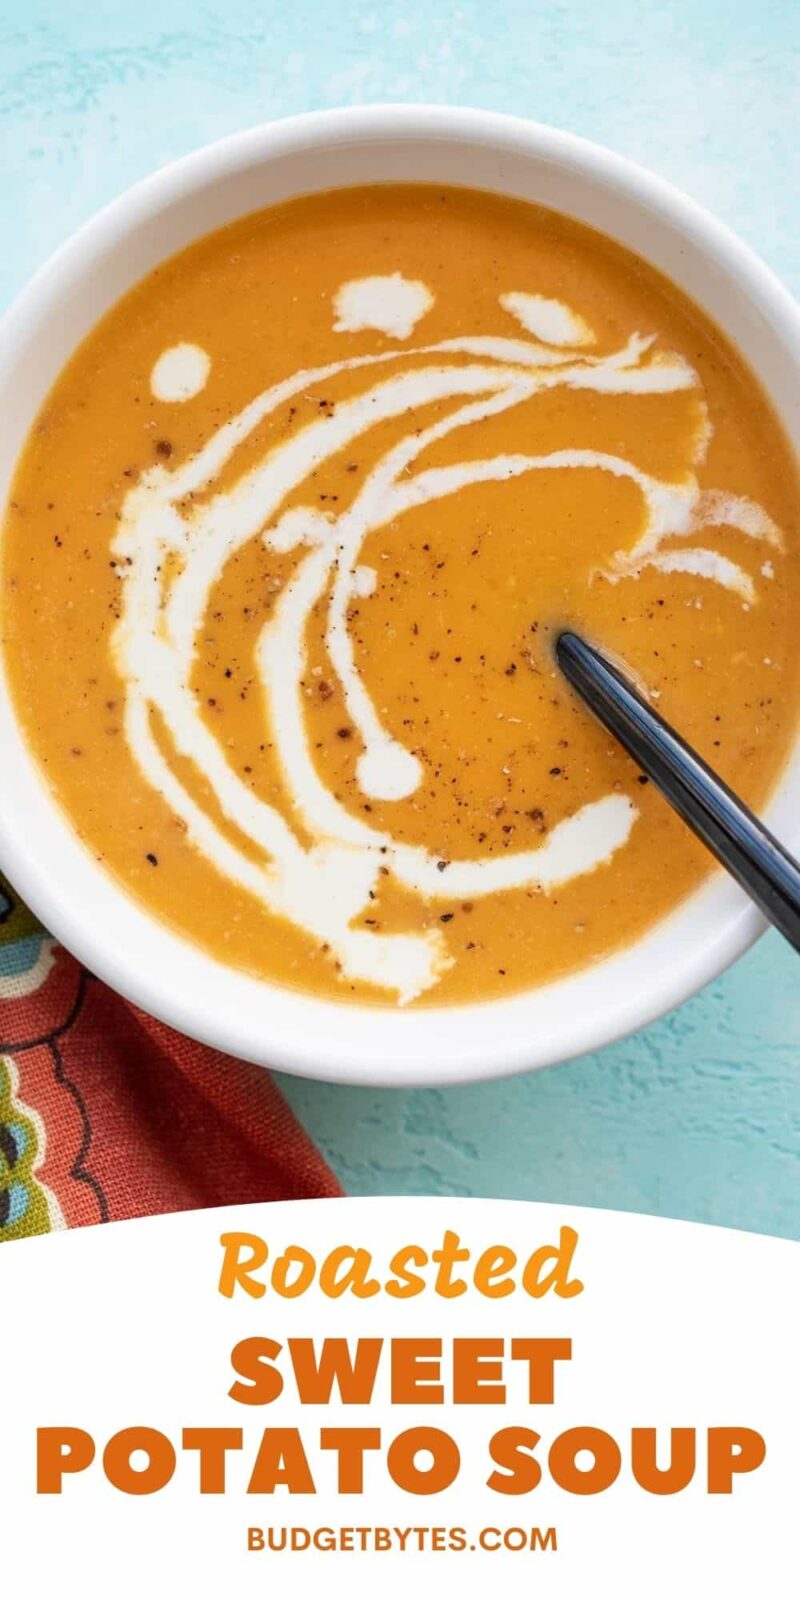 close up of a bowl of sweet potato soup, title text at the bottom